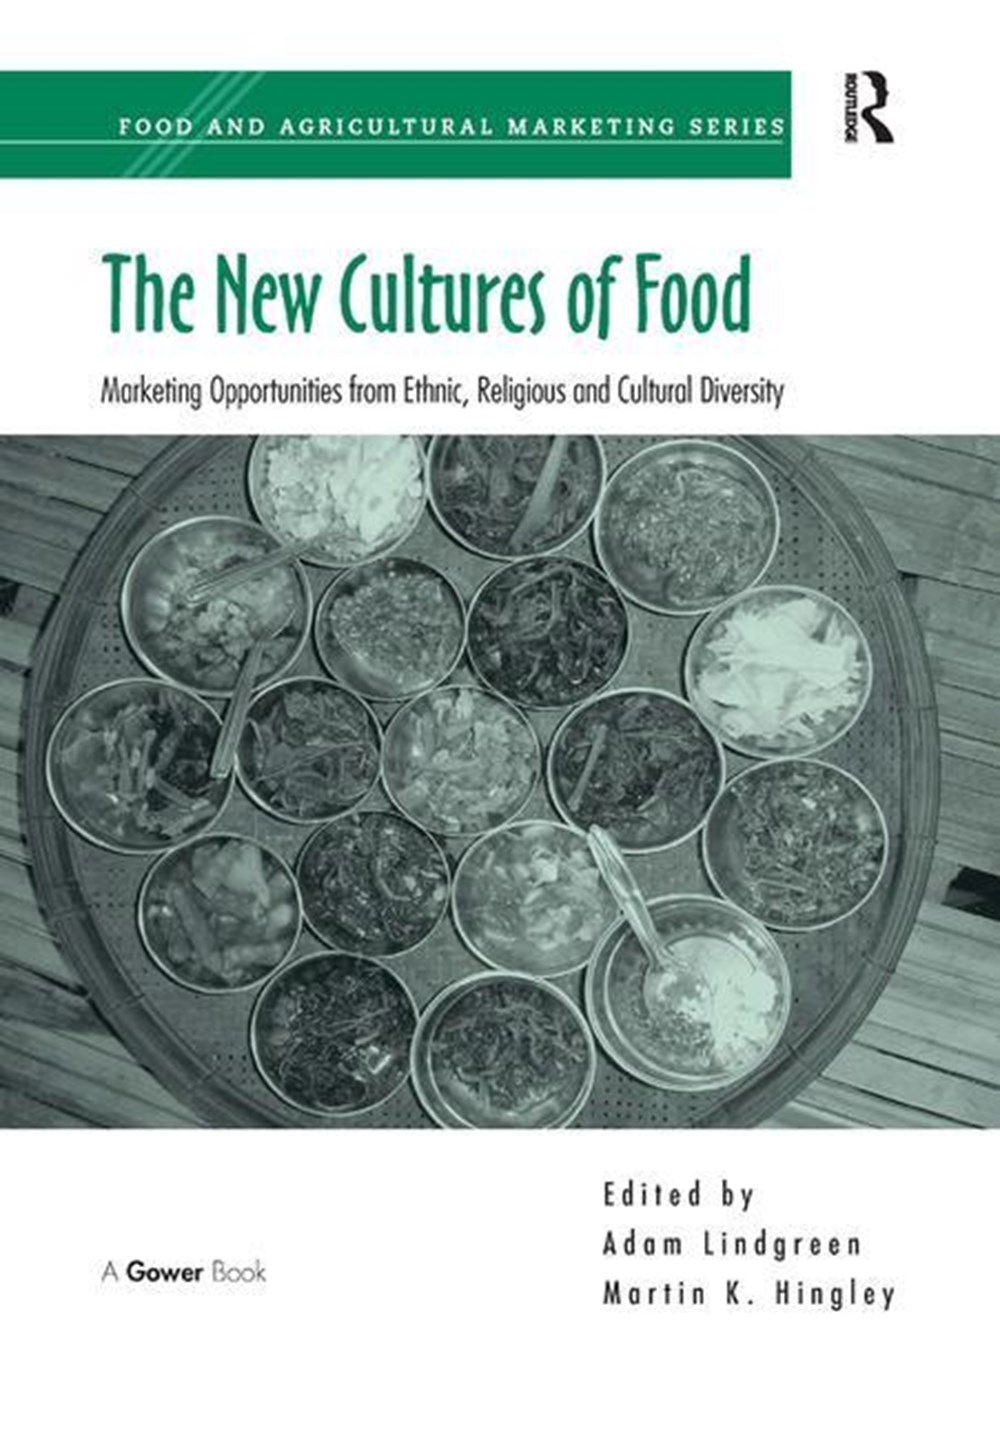 New Cultures of Food: Marketing Opportunities from Ethnic, Religious and Cultural Diversity